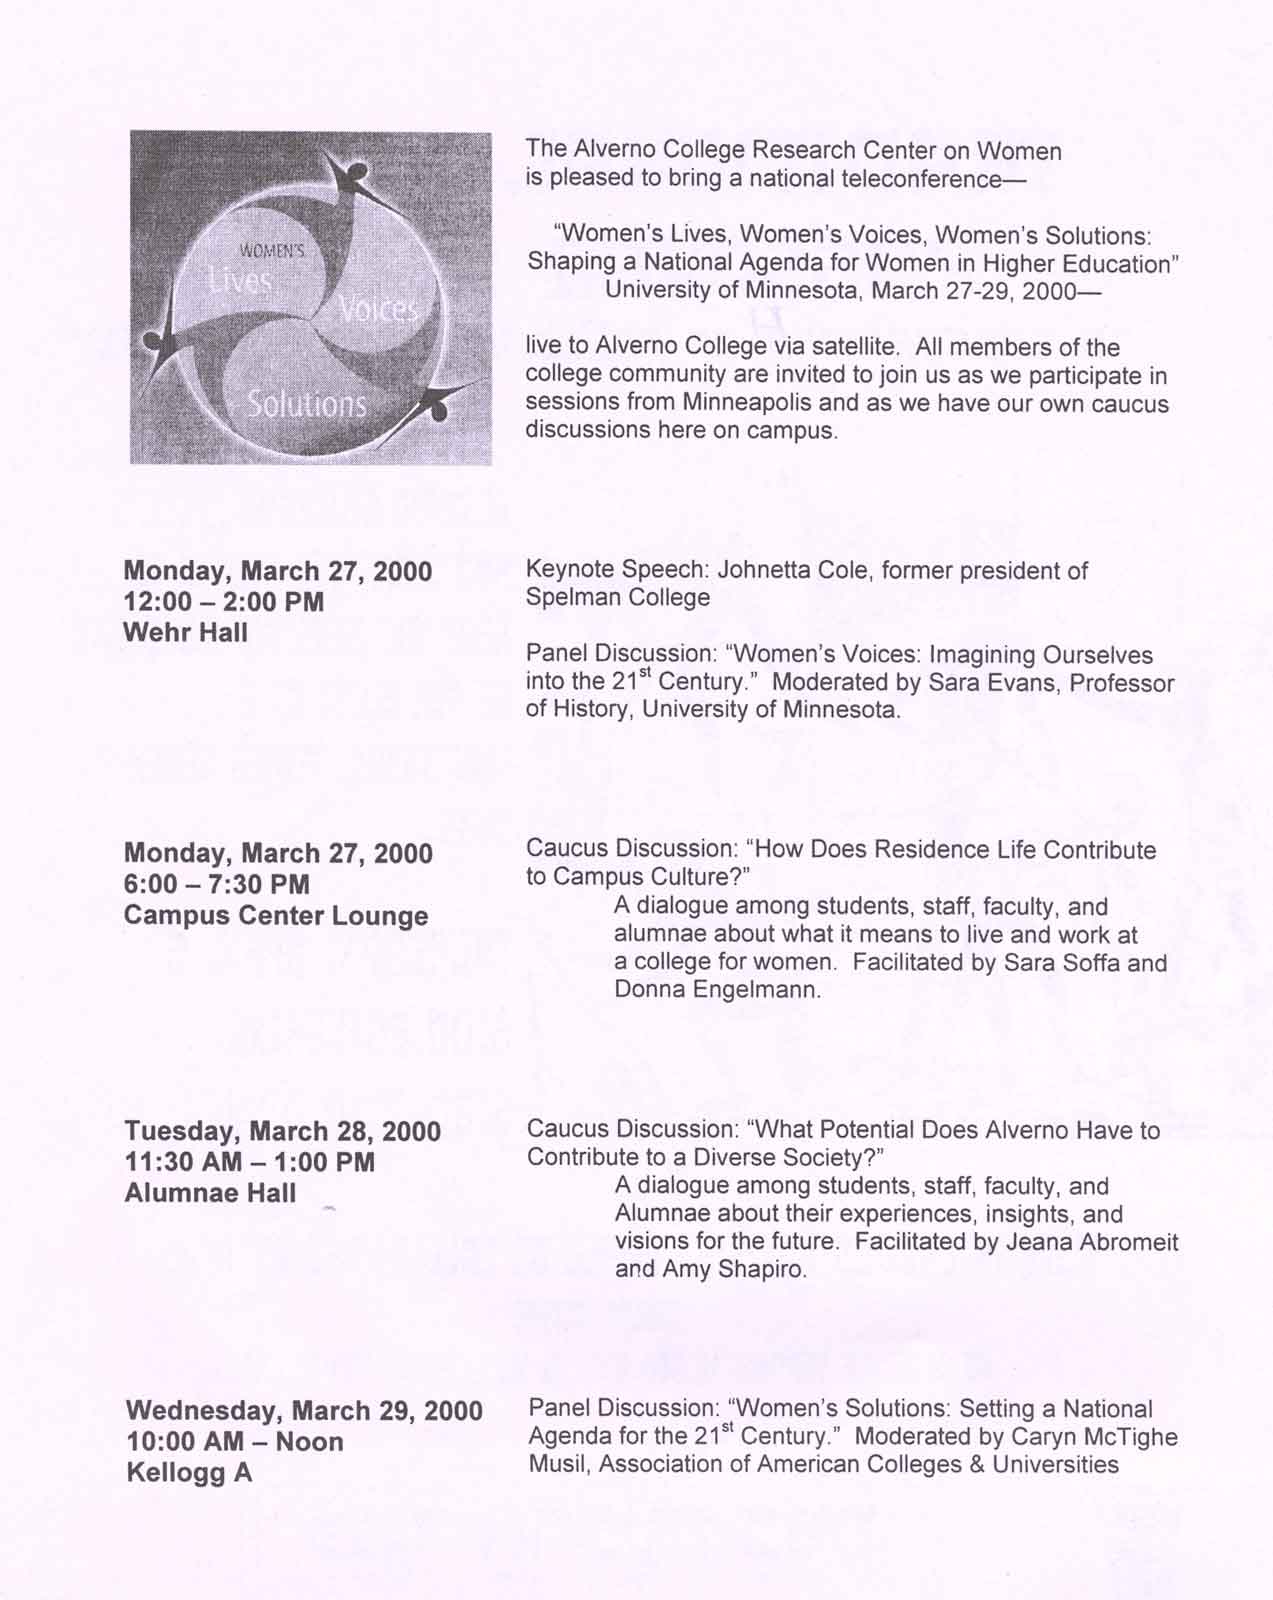 Flyer announcing the National Teleconference on Women in Higher Education, march 2000